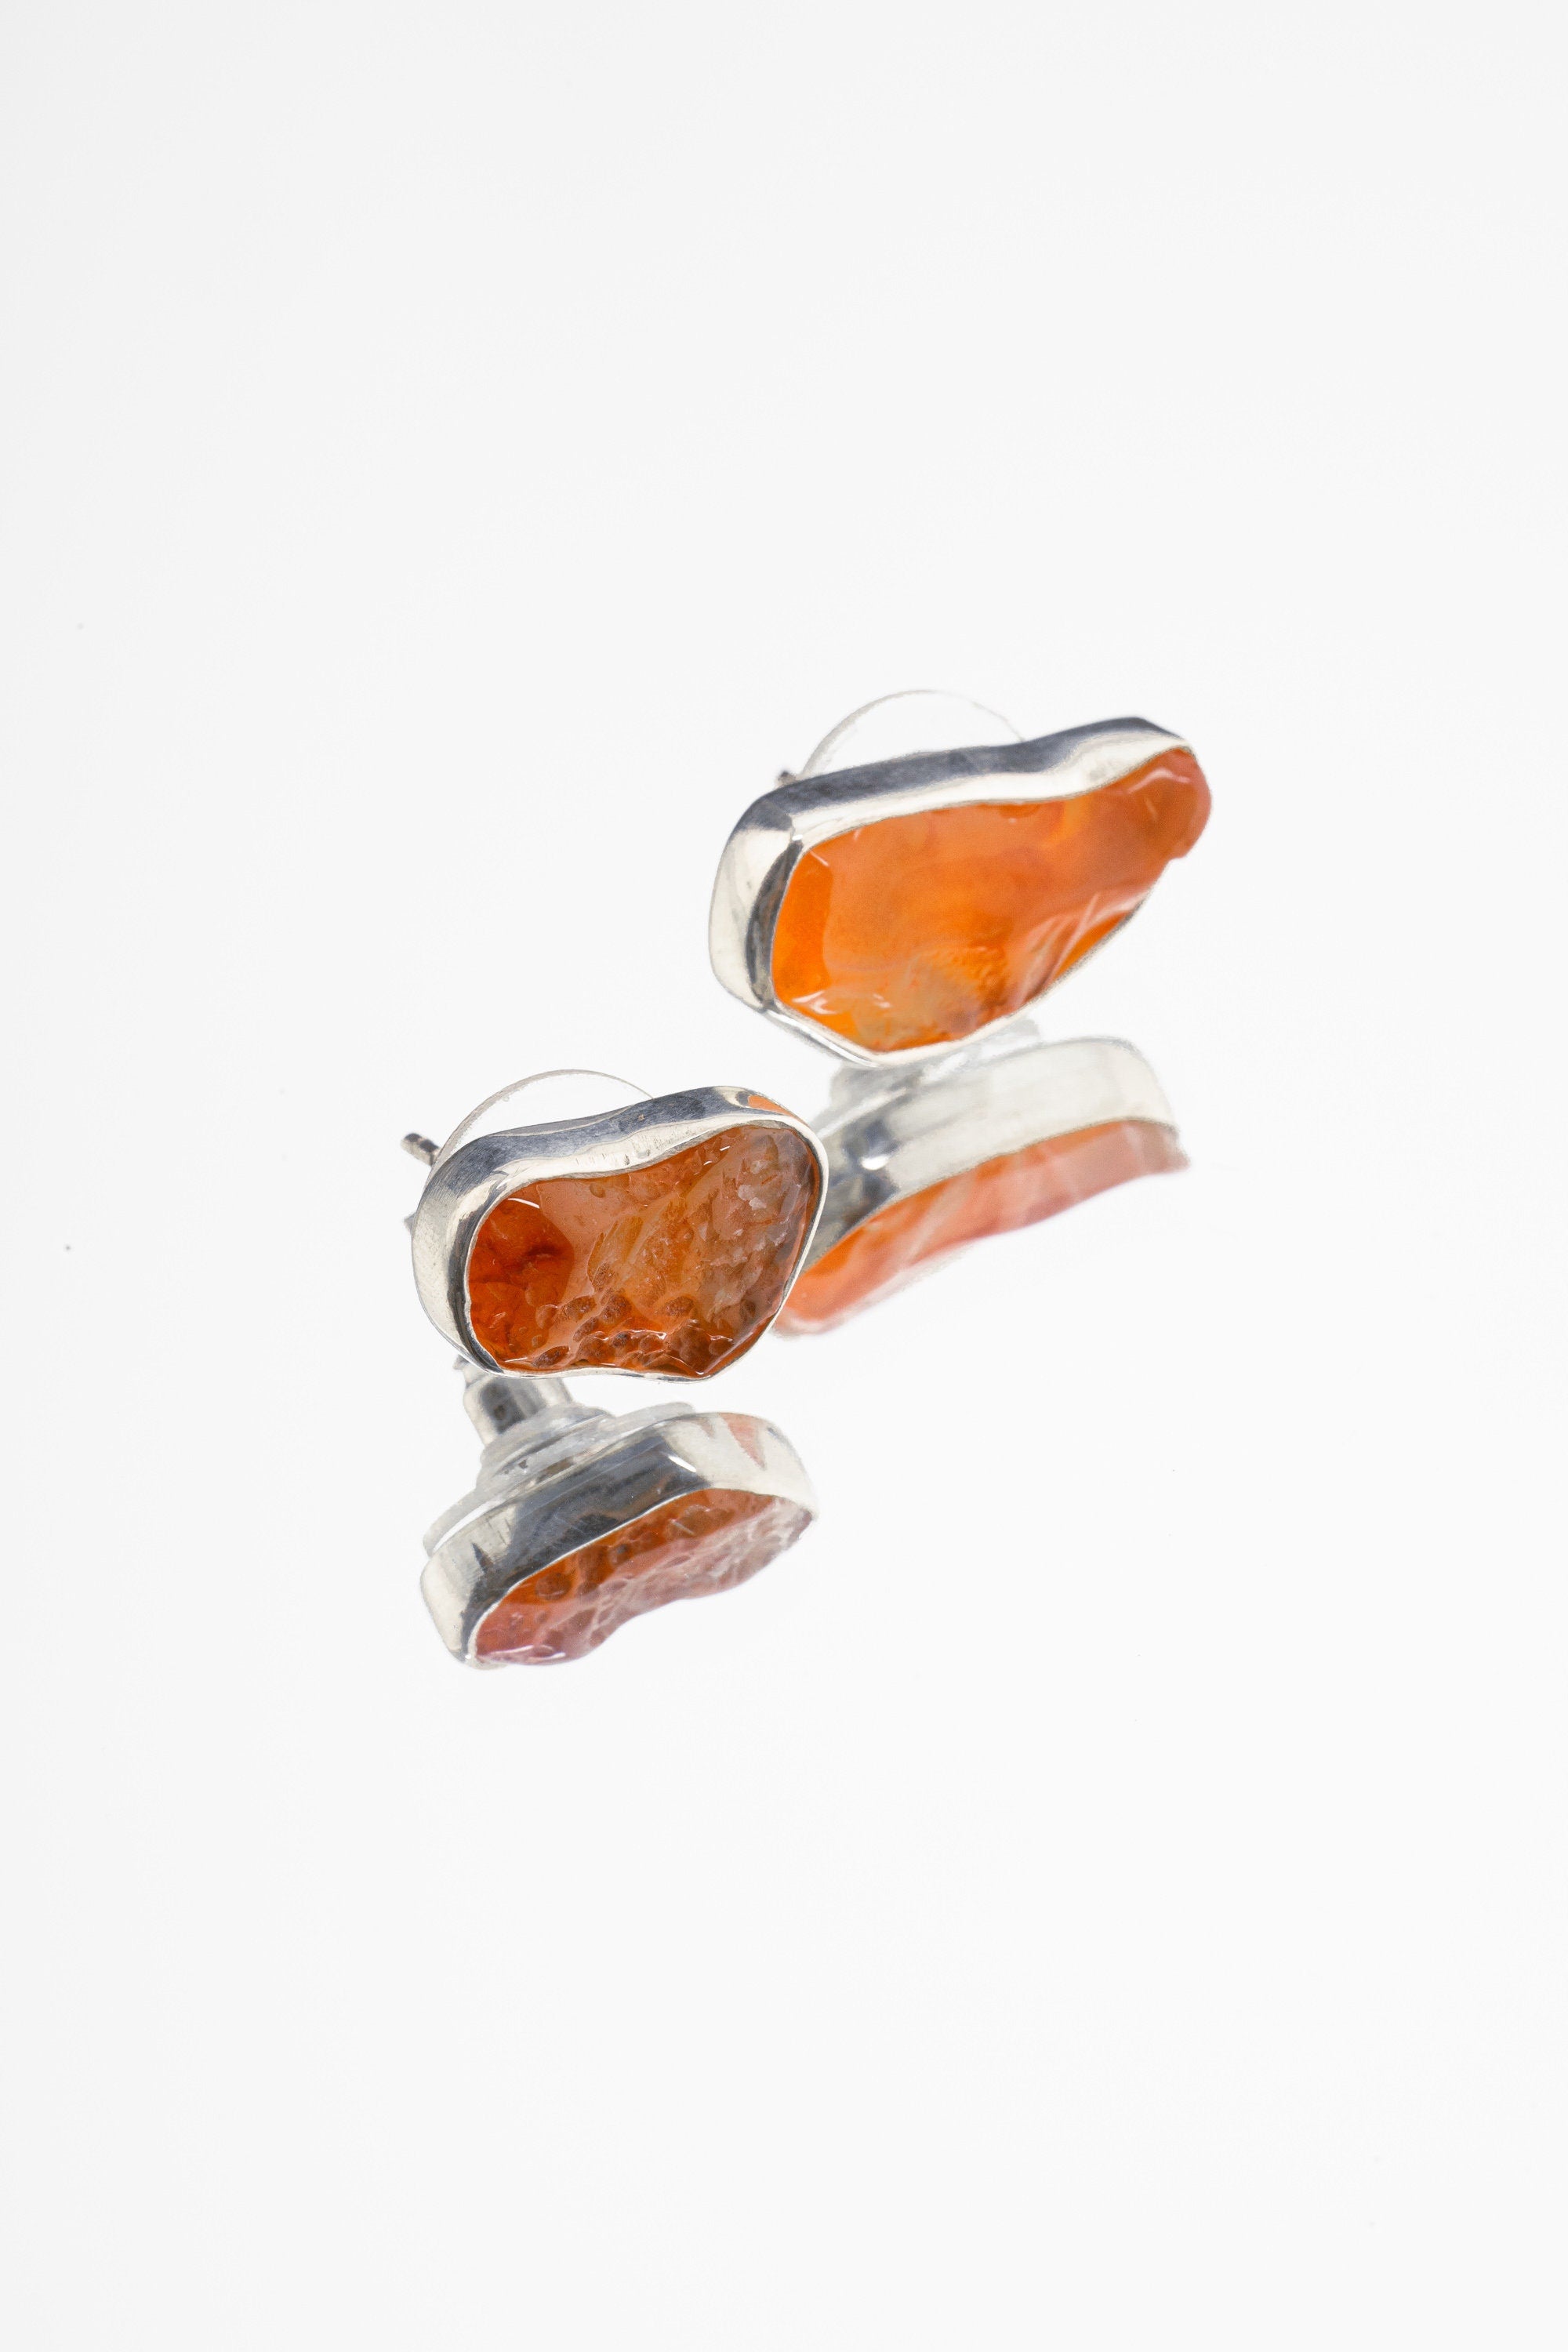 Organic shaped Carnelian Agate Pair- Sterling Silver - Polished Finish - Freeform Earring Studs